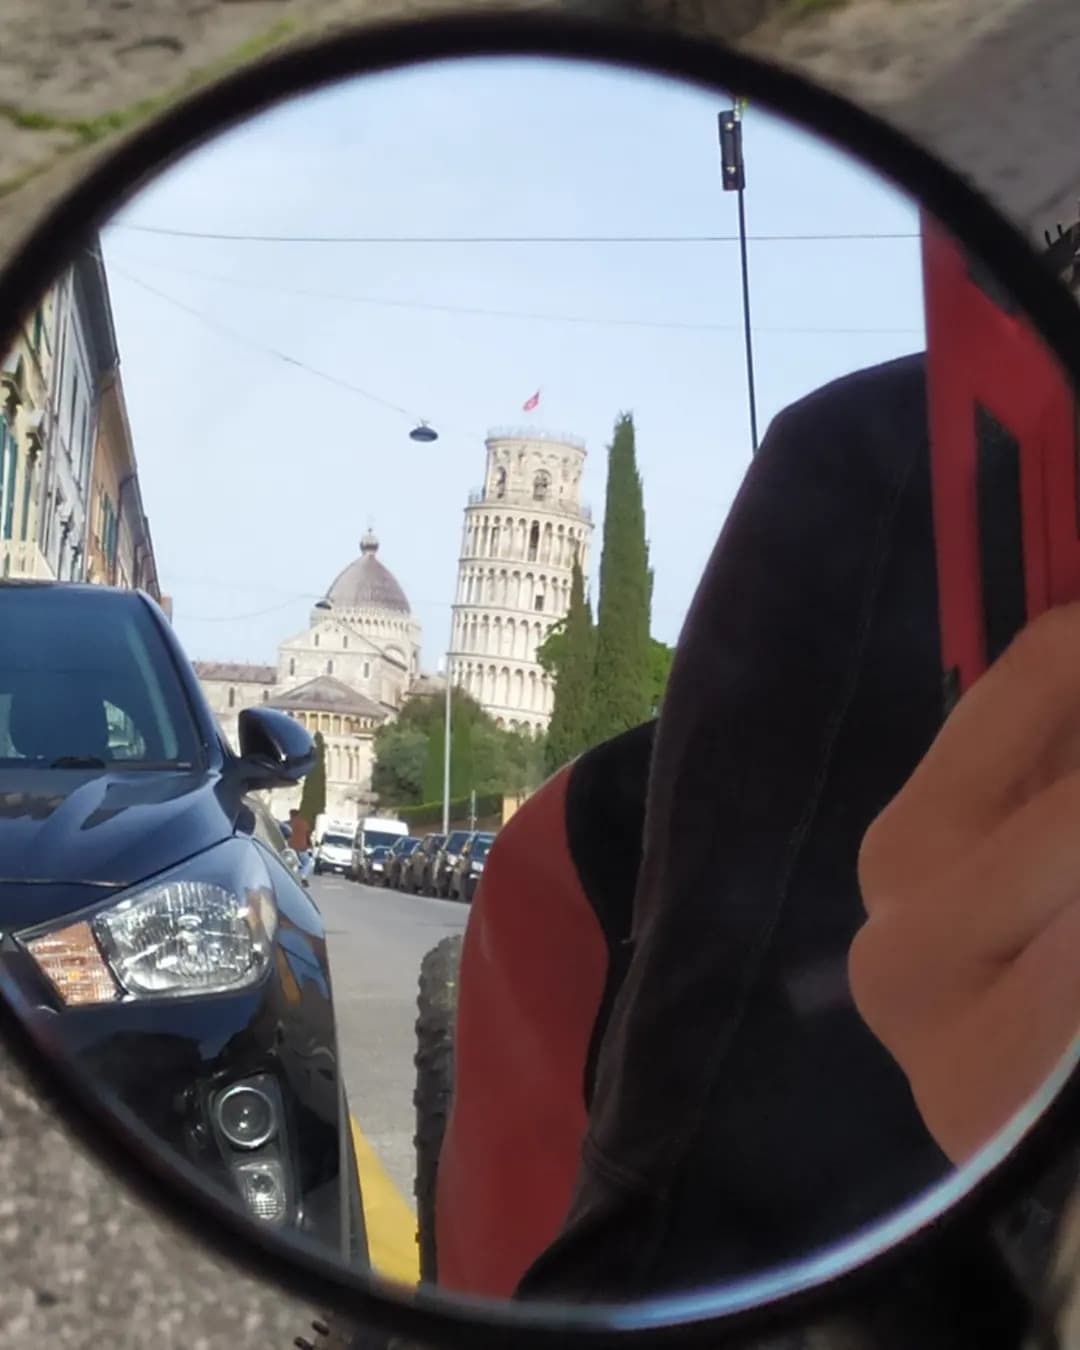 Leaning tower of Pisa in the bike mirror